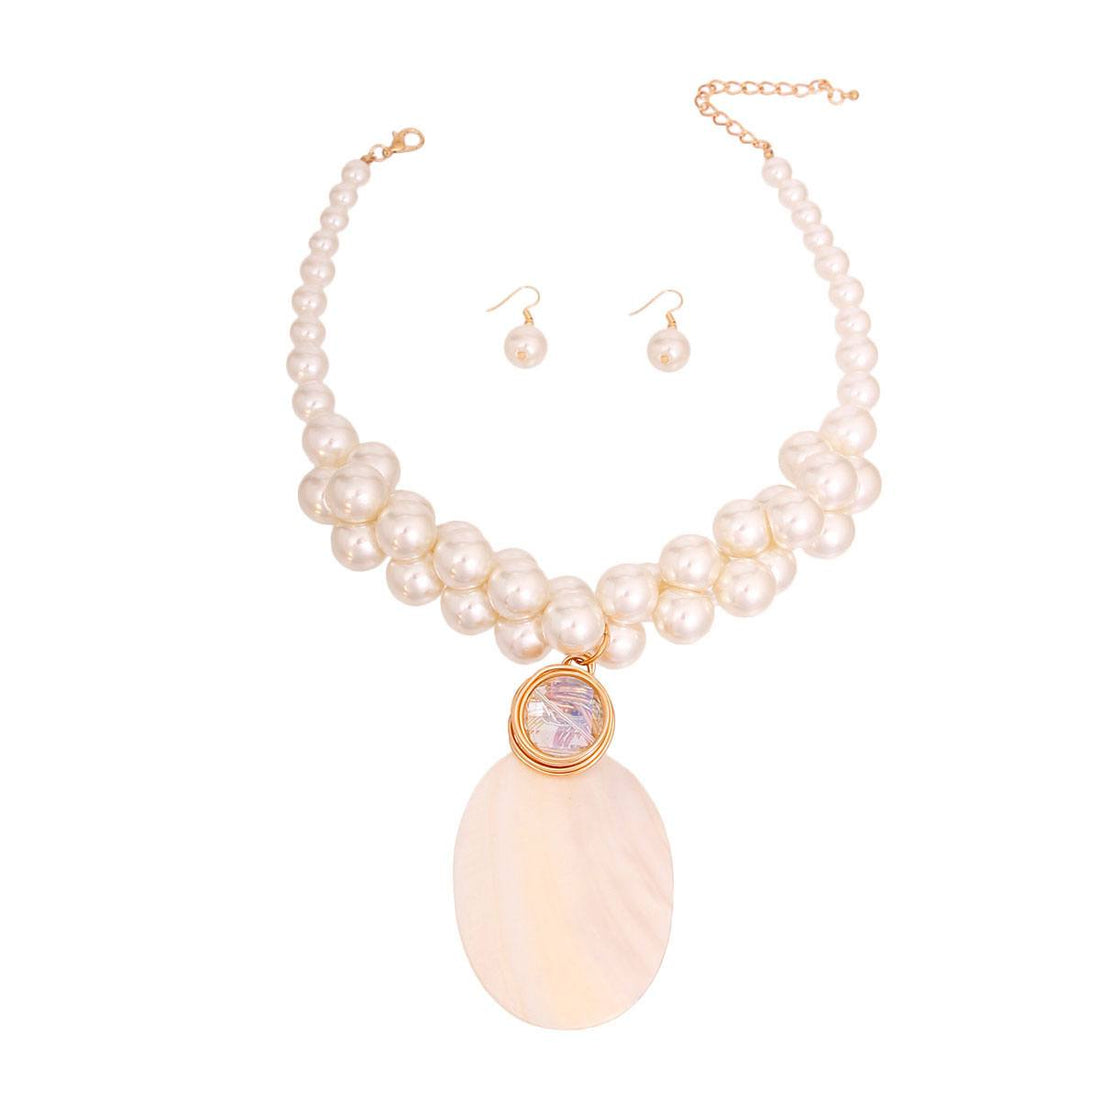 Cream Pearl and Shell Necklace